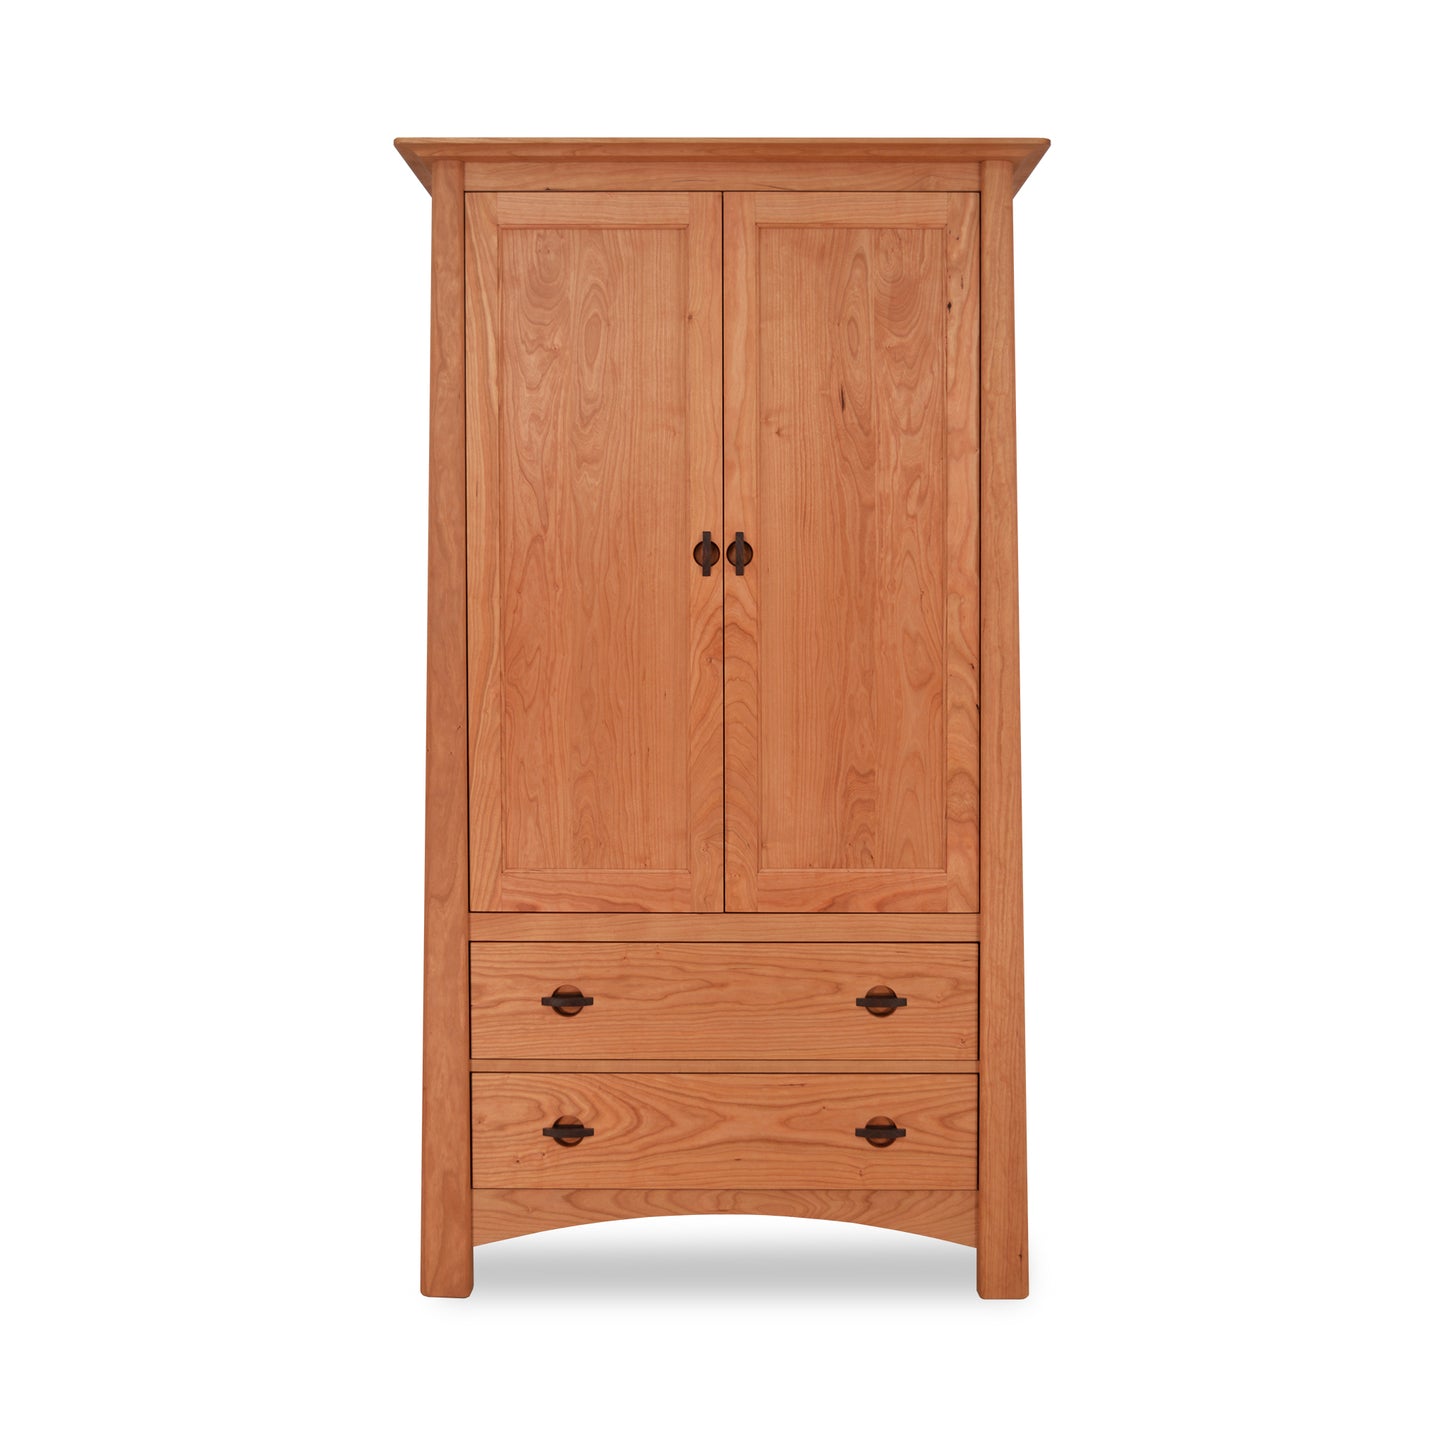 Maple Corner Woodworks Cherry Moon Armoire, crafted from cherry wood with Vermont craftsmanship, features luxurious visible grain patterns, isolated on a white background.